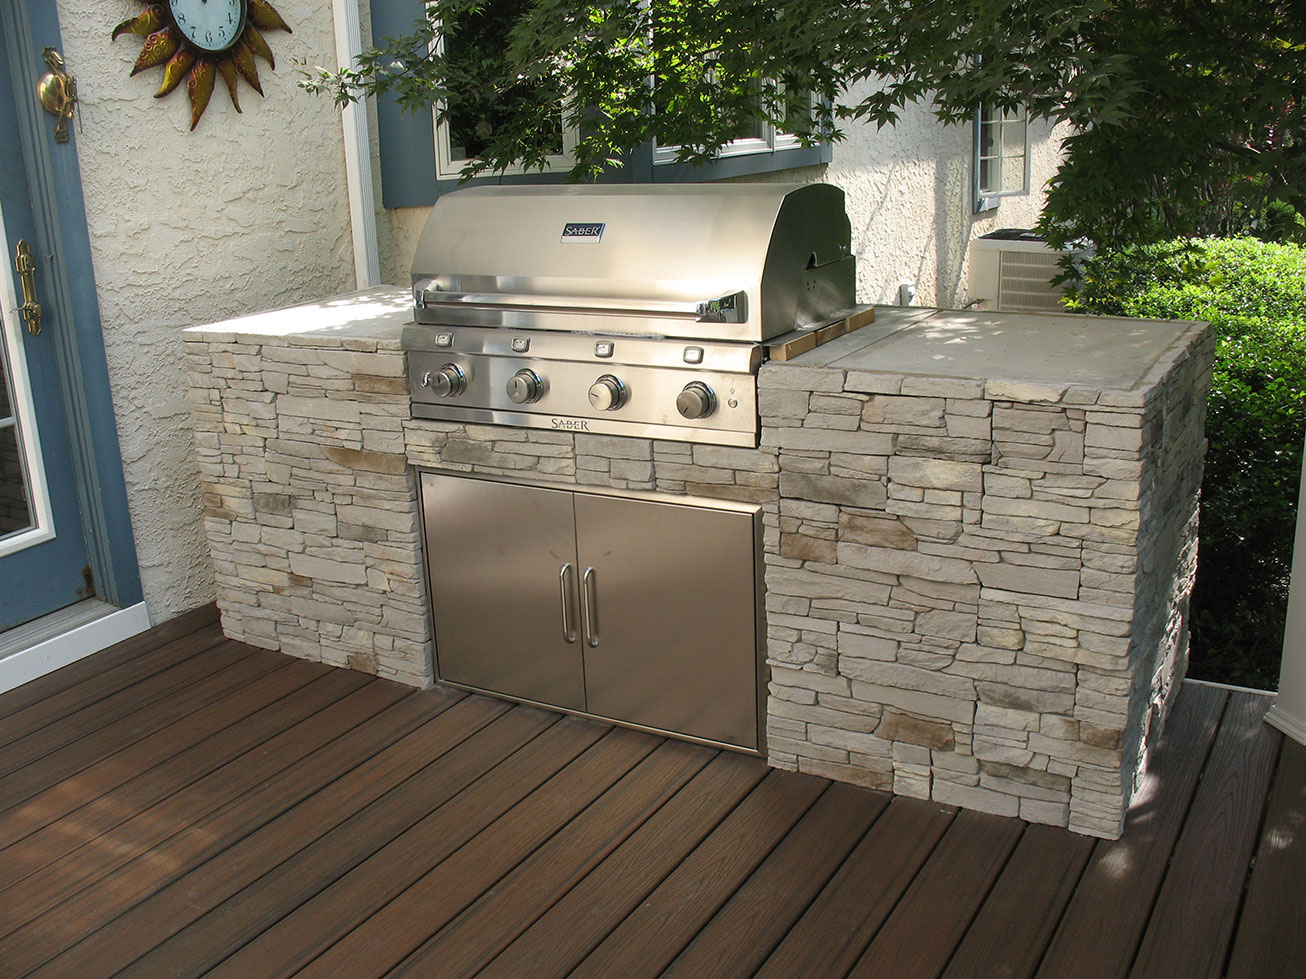 Deck With Grill